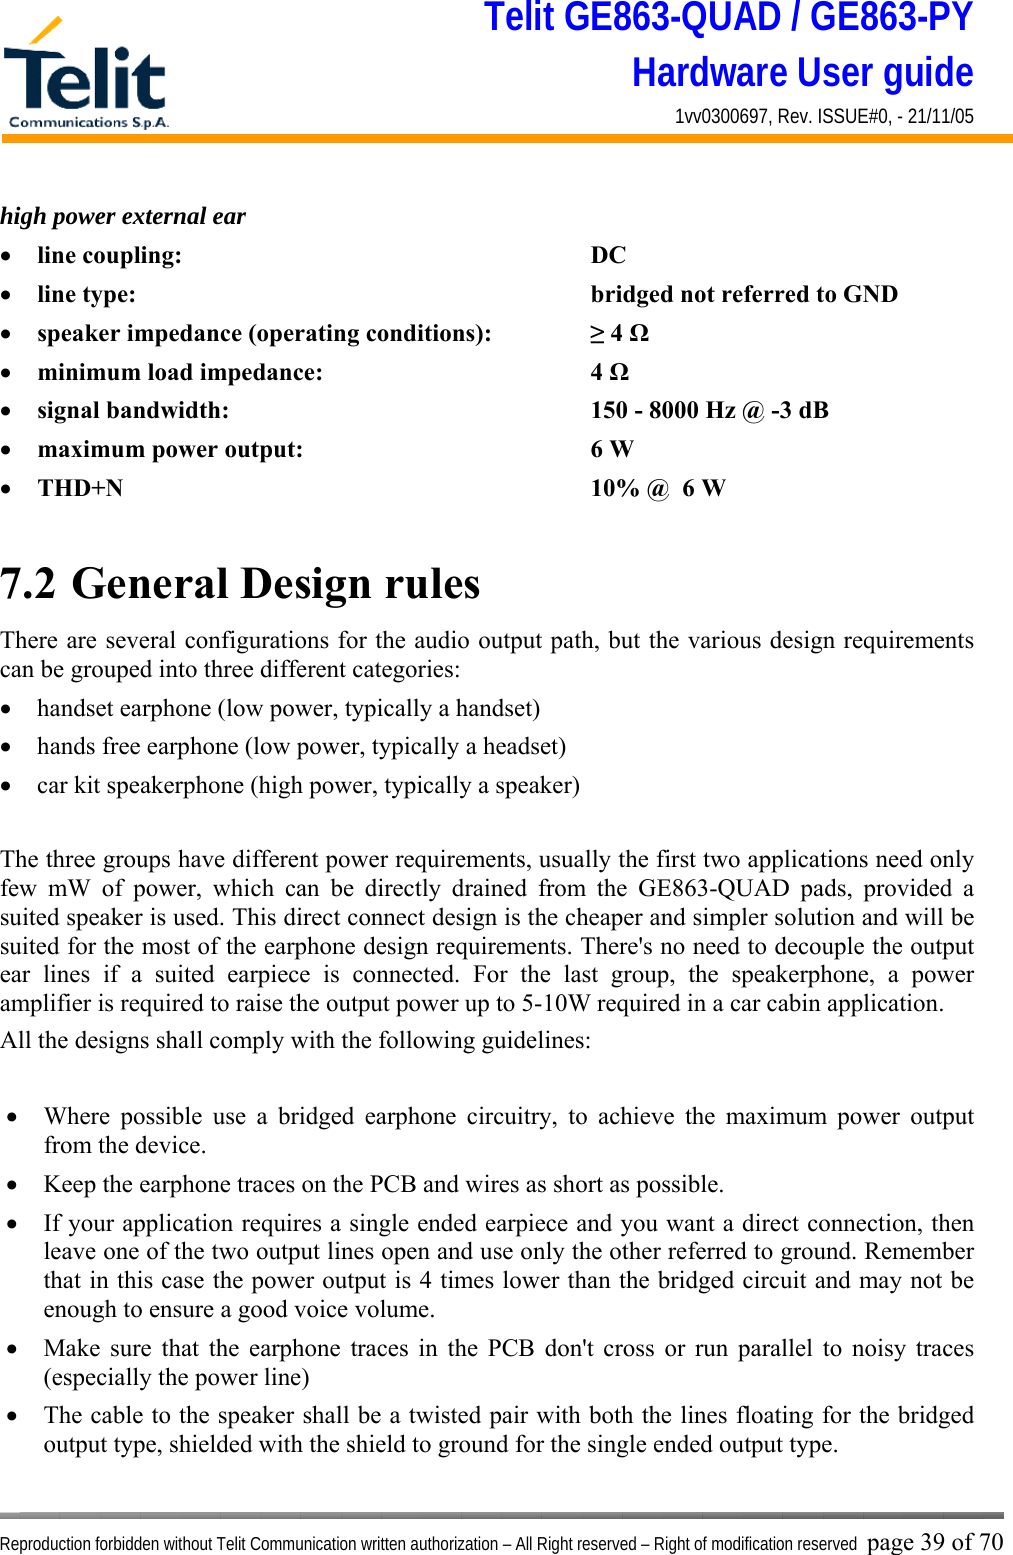 Telit GE863-QUAD / GE863-PY Hardware User guide 1vv0300697, Rev. ISSUE#0, - 21/11/05    Reproduction forbidden without Telit Communication written authorization – All Right reserved – Right of modification reserved page 39 of 70 high power external ear •  line coupling:      DC  •  line type:       bridged not referred to GND •  speaker impedance (operating conditions):    ≥ 4 Ω •  minimum load impedance:    4 Ω •  signal bandwidth:          150 - 8000 Hz @ -3 dB  •  maximum power output:    6 W  •  THD+N       10% @  6 W  7.2  General Design rules There are several configurations for the audio output path, but the various design requirements can be grouped into three different categories: •  handset earphone (low power, typically a handset) •  hands free earphone (low power, typically a headset) •  car kit speakerphone (high power, typically a speaker)   The three groups have different power requirements, usually the first two applications need only few mW of power, which can be directly drained from the GE863-QUAD pads, provided a suited speaker is used. This direct connect design is the cheaper and simpler solution and will be suited for the most of the earphone design requirements. There&apos;s no need to decouple the output ear lines if a suited earpiece is connected. For the last group, the speakerphone, a power amplifier is required to raise the output power up to 5-10W required in a car cabin application. All the designs shall comply with the following guidelines:  •  Where possible use a bridged earphone circuitry, to achieve the maximum power output from the device. •  Keep the earphone traces on the PCB and wires as short as possible. •  If your application requires a single ended earpiece and you want a direct connection, then leave one of the two output lines open and use only the other referred to ground. Remember that in this case the power output is 4 times lower than the bridged circuit and may not be enough to ensure a good voice volume.  •  Make sure that the earphone traces in the PCB don&apos;t cross or run parallel to noisy traces (especially the power line)  •  The cable to the speaker shall be a twisted pair with both the lines floating for the bridged output type, shielded with the shield to ground for the single ended output type. 